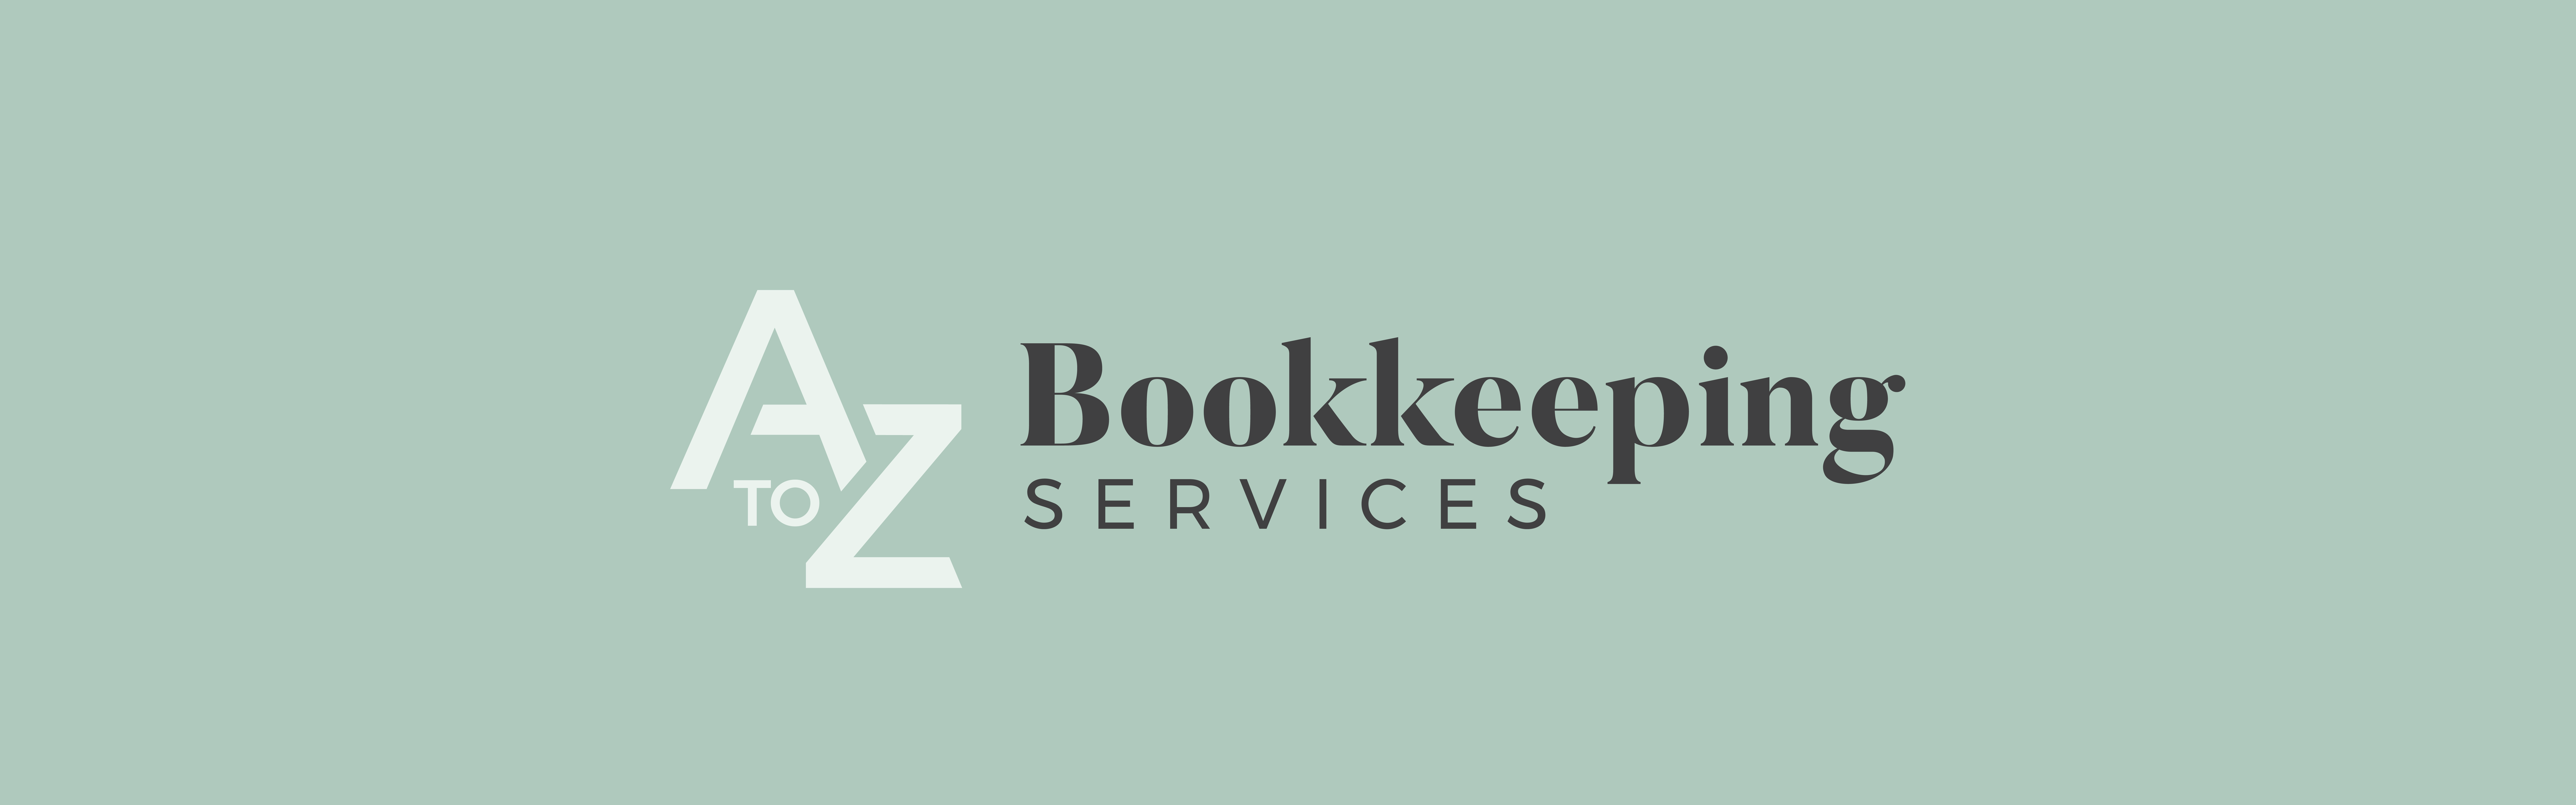 Logo of "A to Z Bookkeeping Services" featuring stylized letters on a plain background.